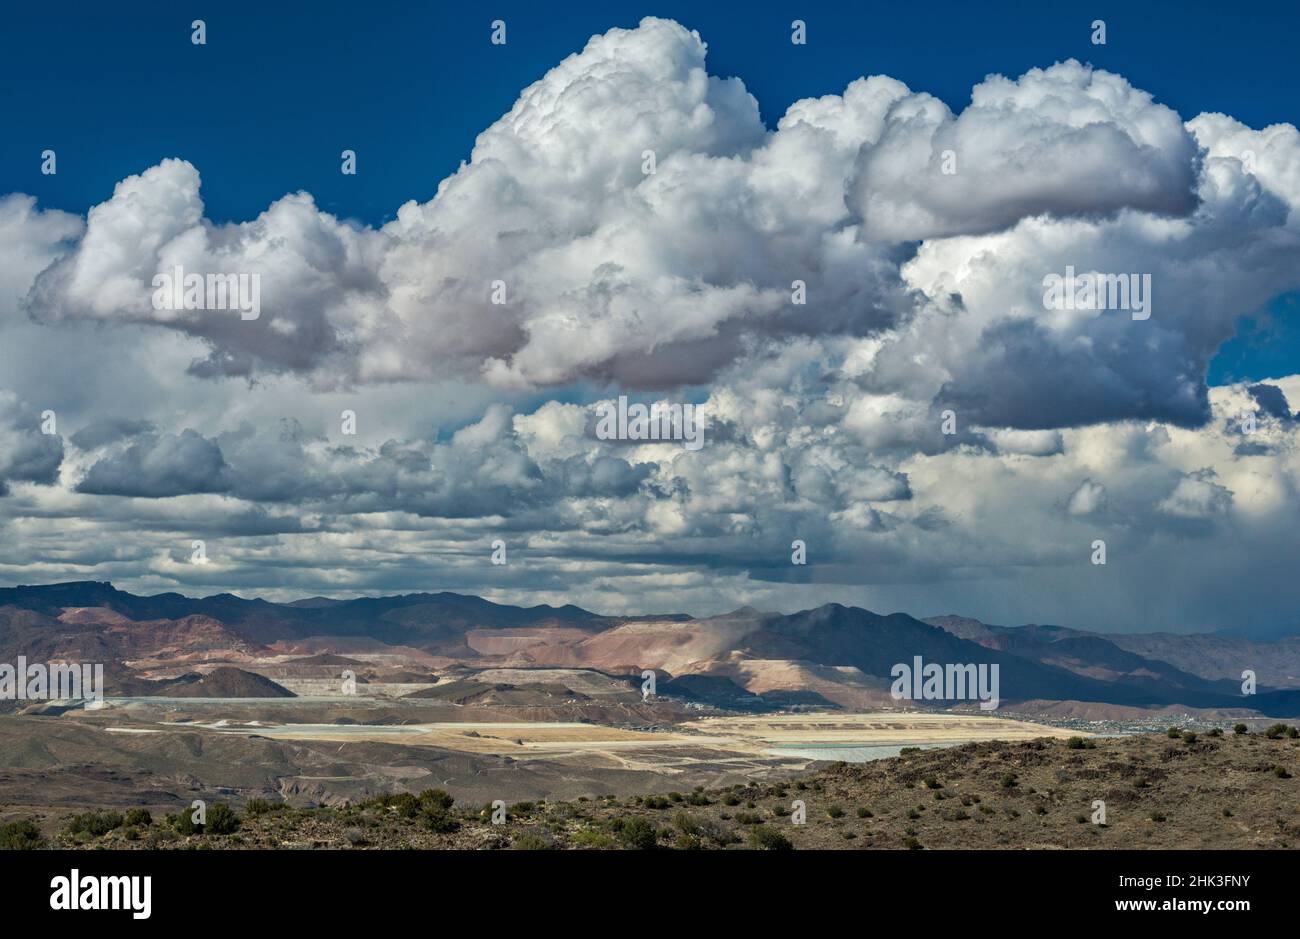 Towering cumulus clouds, rain over Morenci copper mine in far dist 12 m N, White Mountains behind, view from Black Hills, near Clifton, Arizona, USA Stock Photo